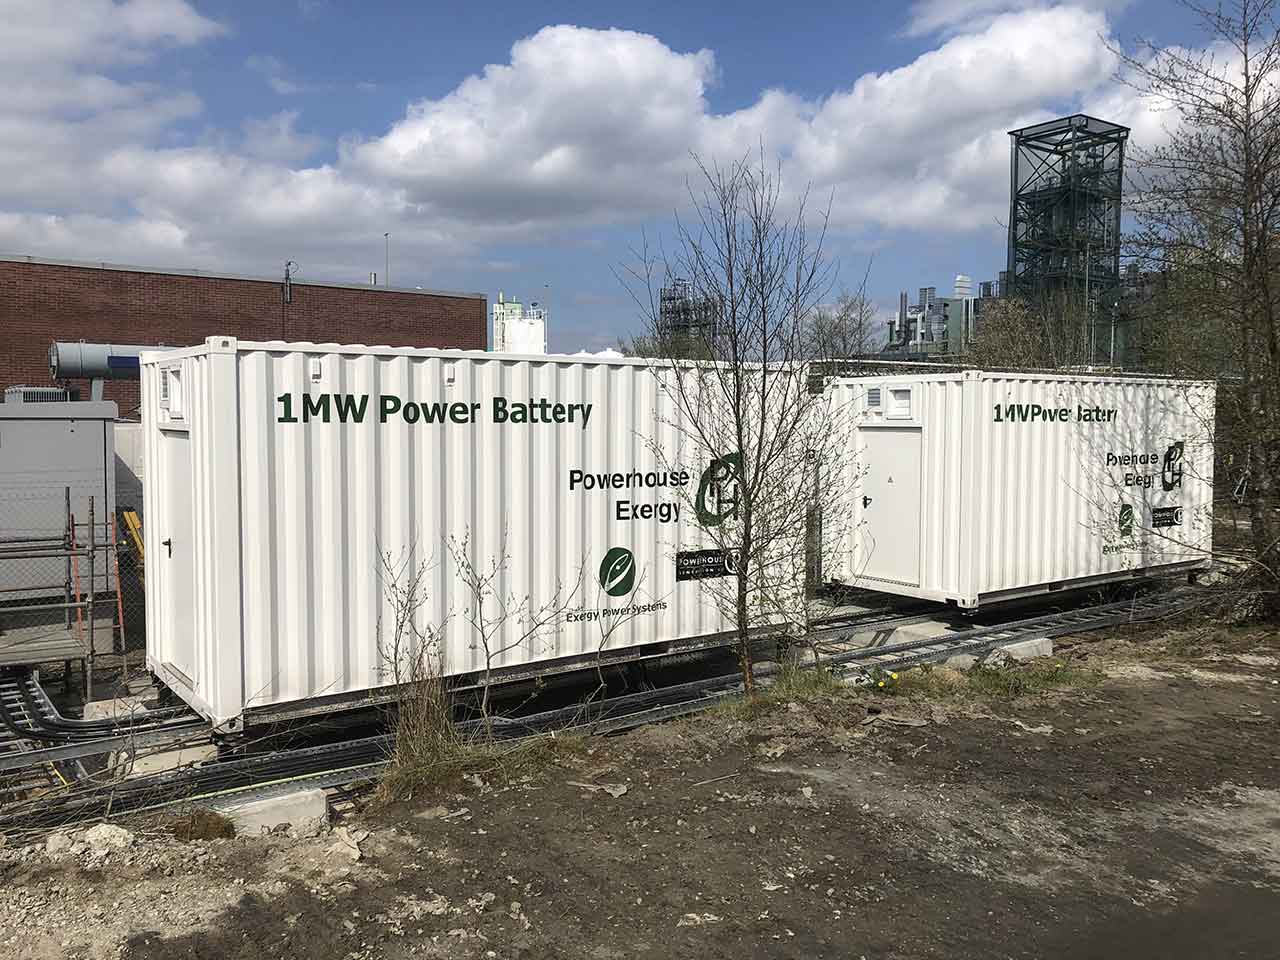 Image 1 of Investment in Exergy Power Systems, a next-generation battery storage systems startup